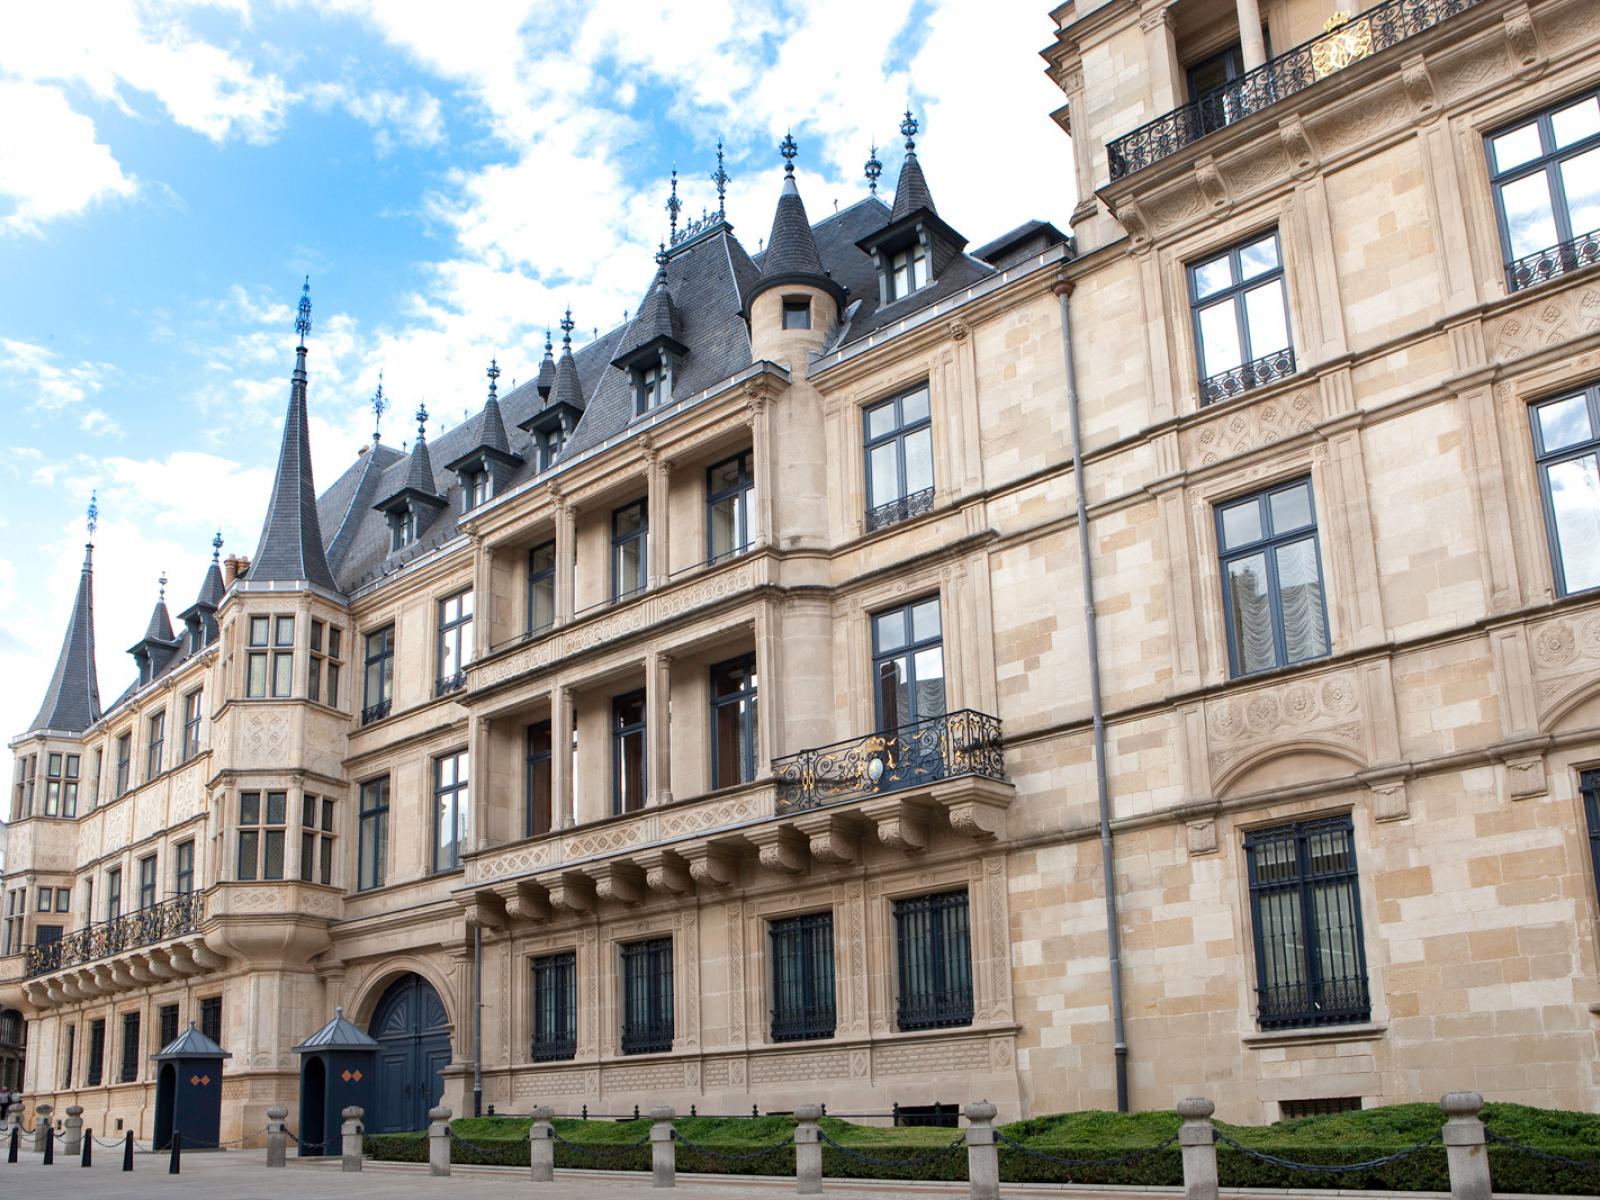 View of the facade of the Grand Ducal Palace